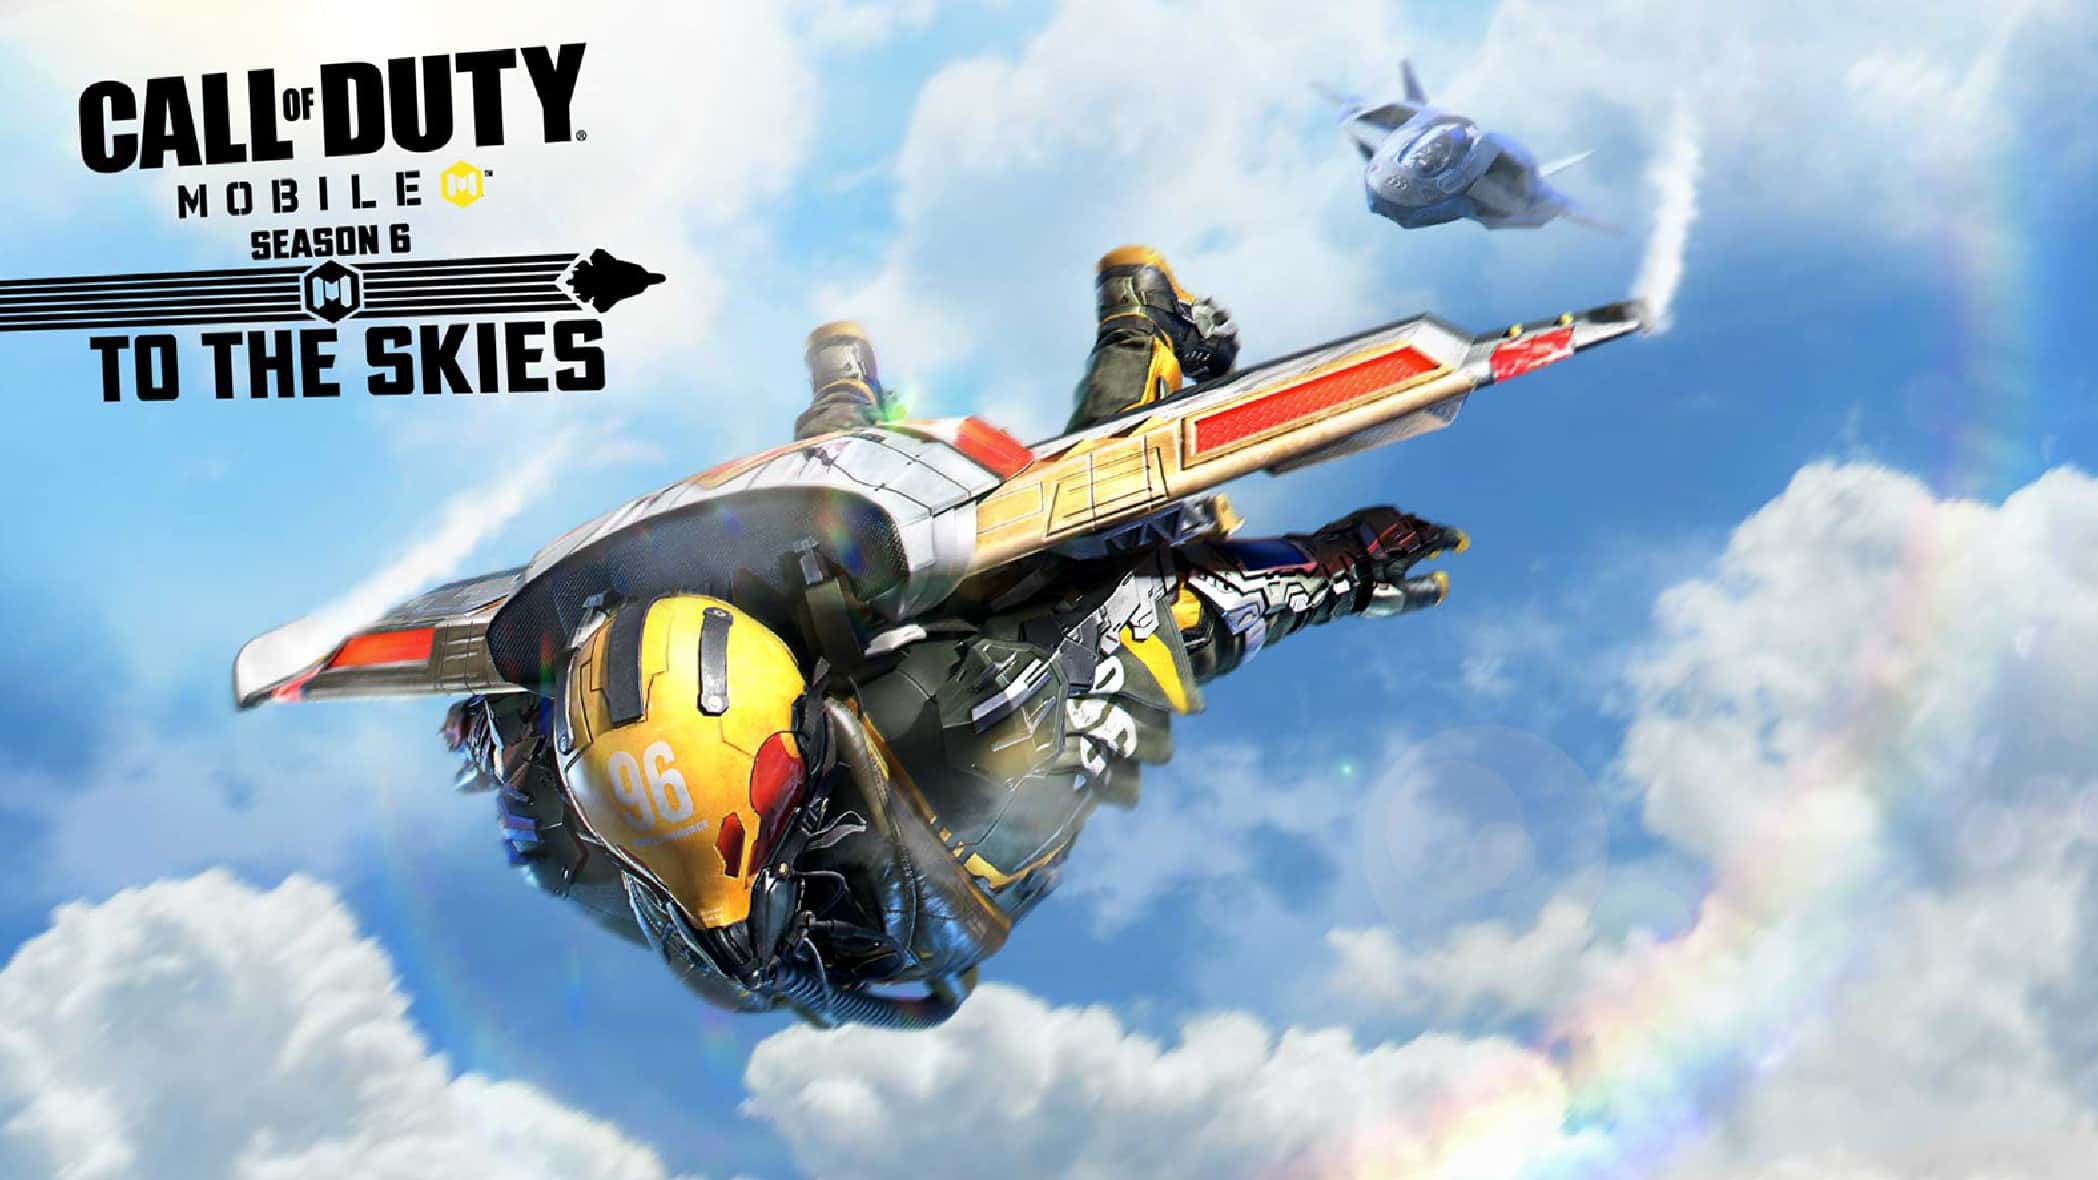 CoD Mobile Season 6 To The Skies cover art